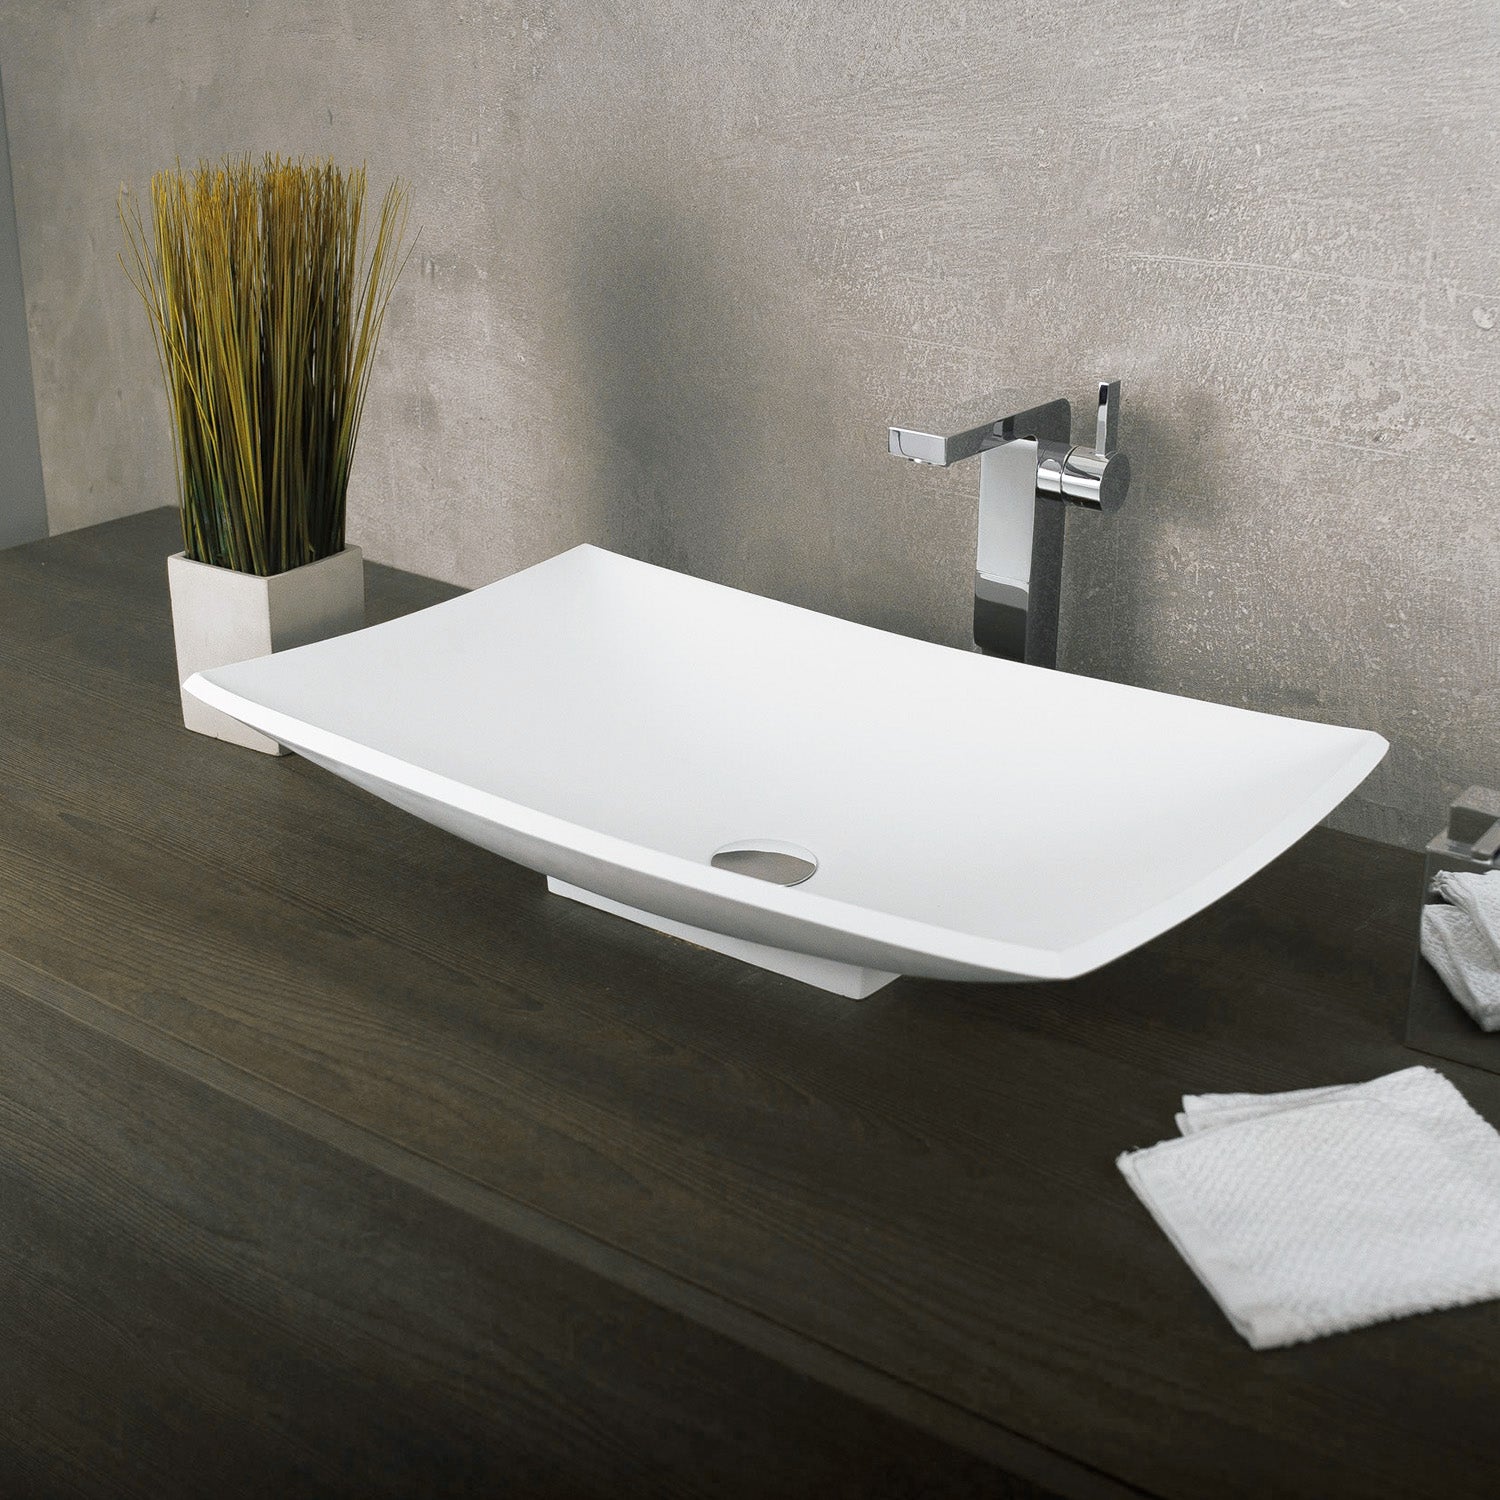 DAX Solid Surface Rectangle Single Bowl Bathroom Vessel Sink, White Matte Finish, 25-2/5 x 15-3/8 x 5-3/4 Inches (DAX-AB-1325)